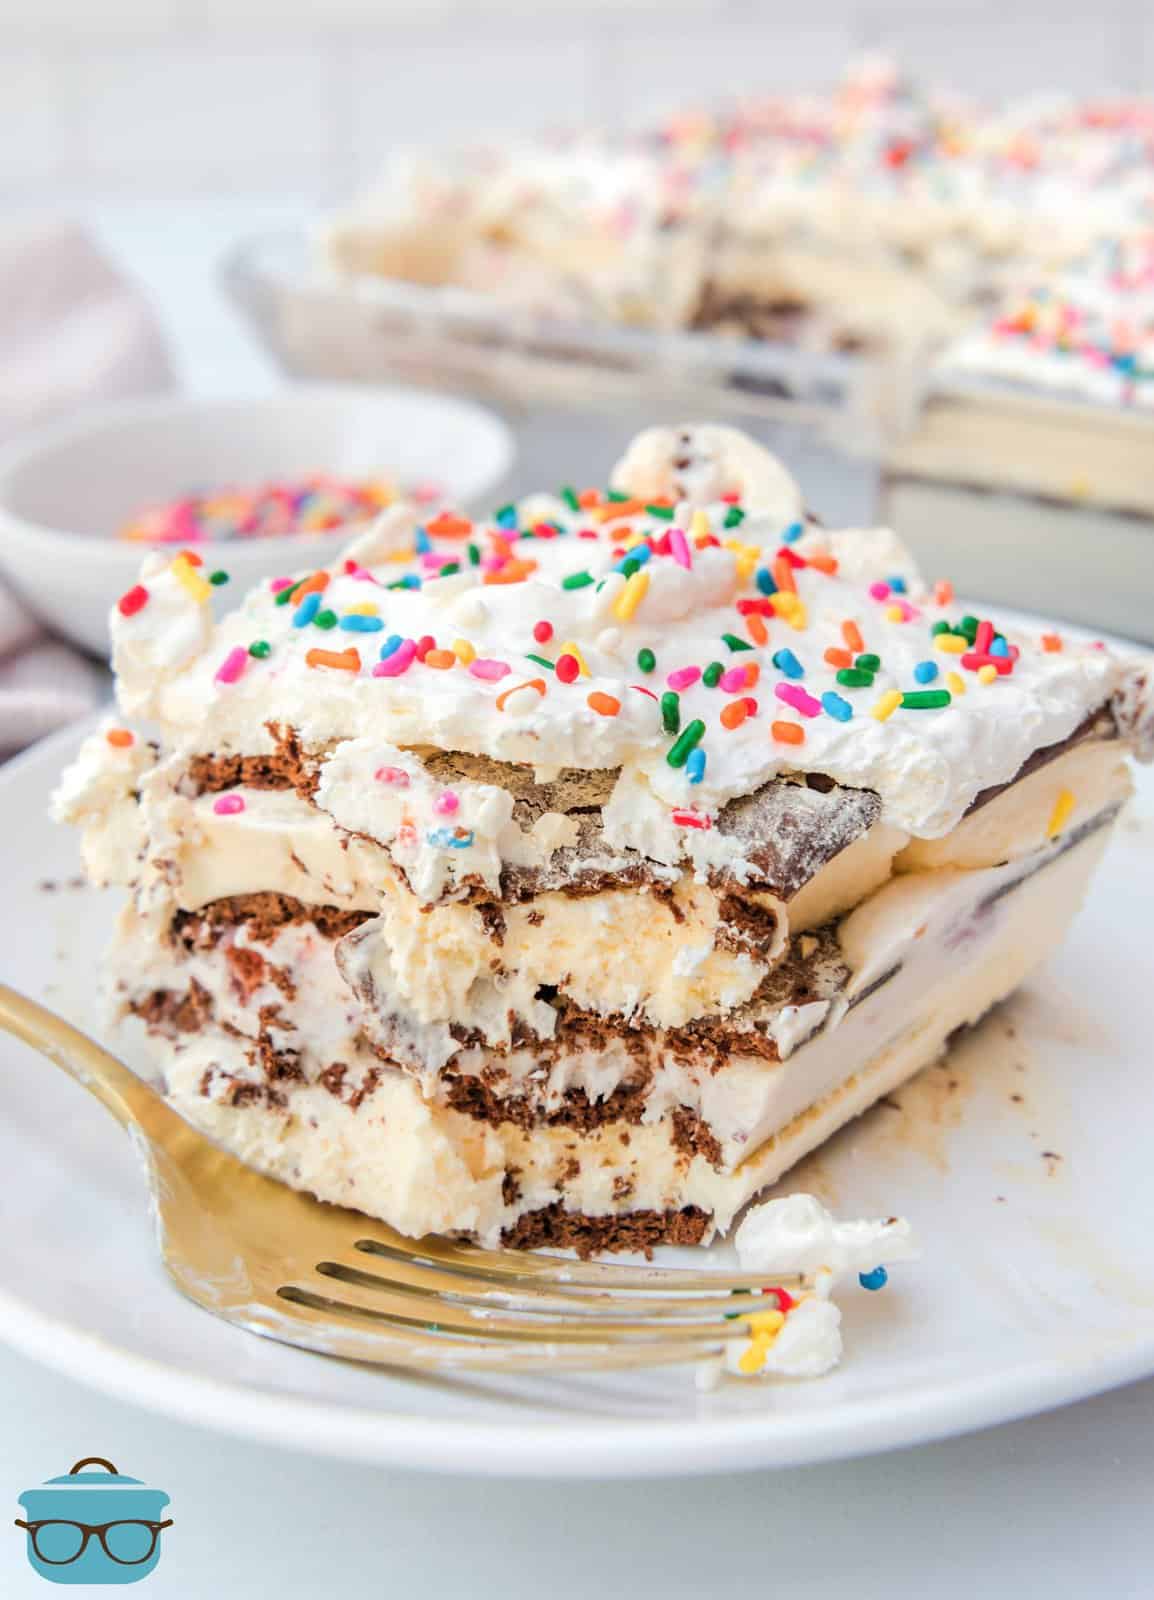 Slice of Ice Cream Sandwich Cake on white plate with bite taken out of it.